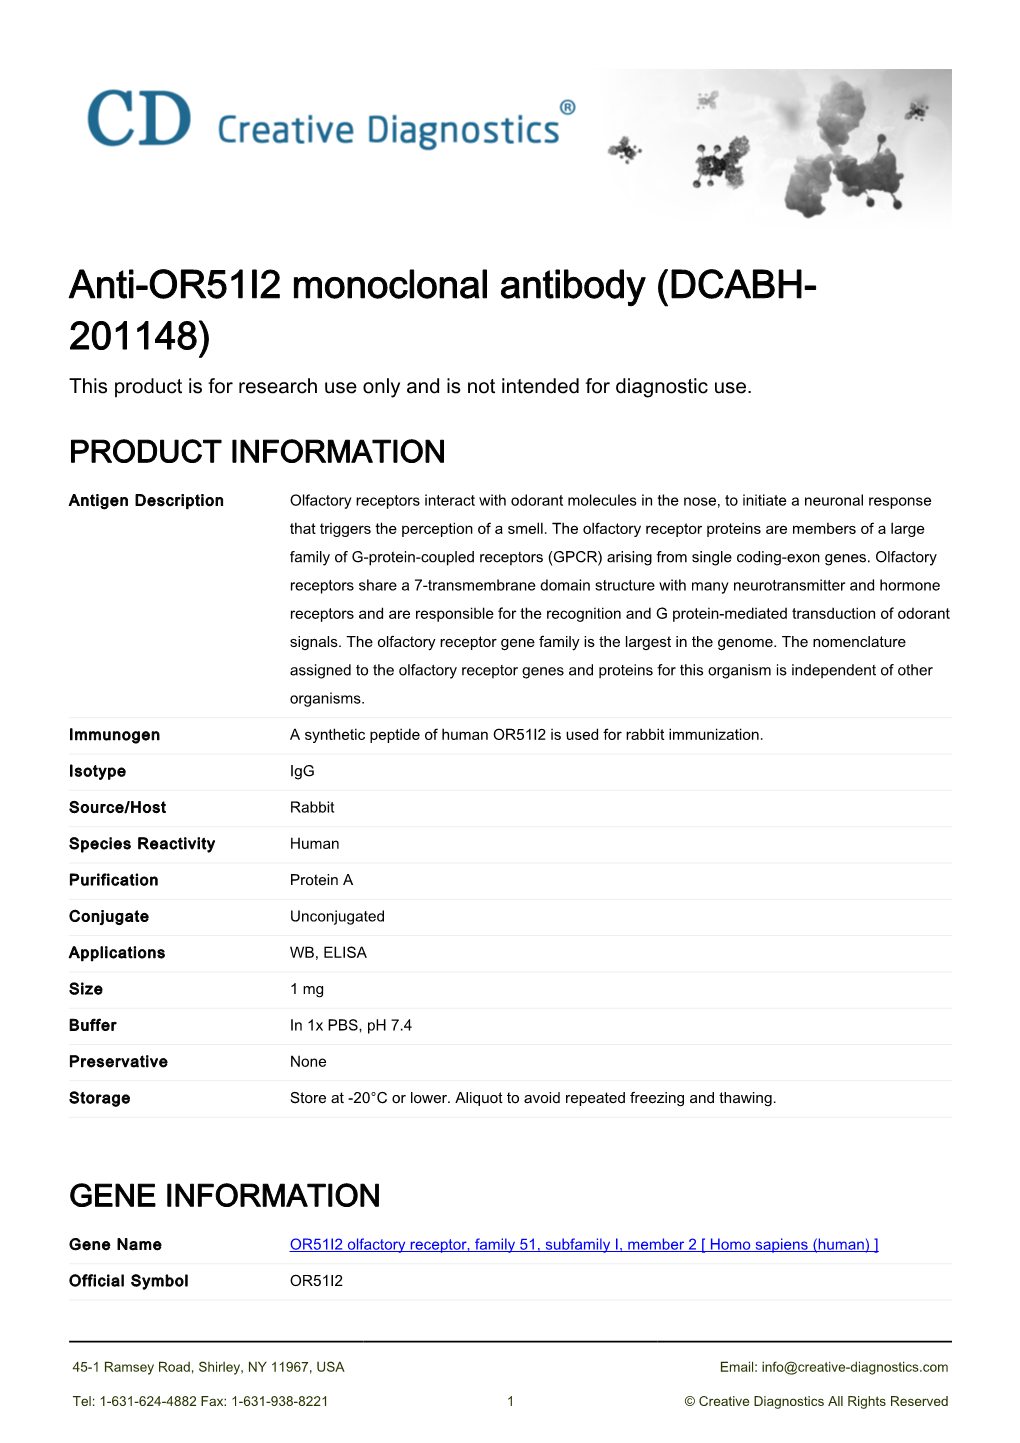 Anti-OR51I2 Monoclonal Antibody (DCABH- 201148) This Product Is for Research Use Only and Is Not Intended for Diagnostic Use